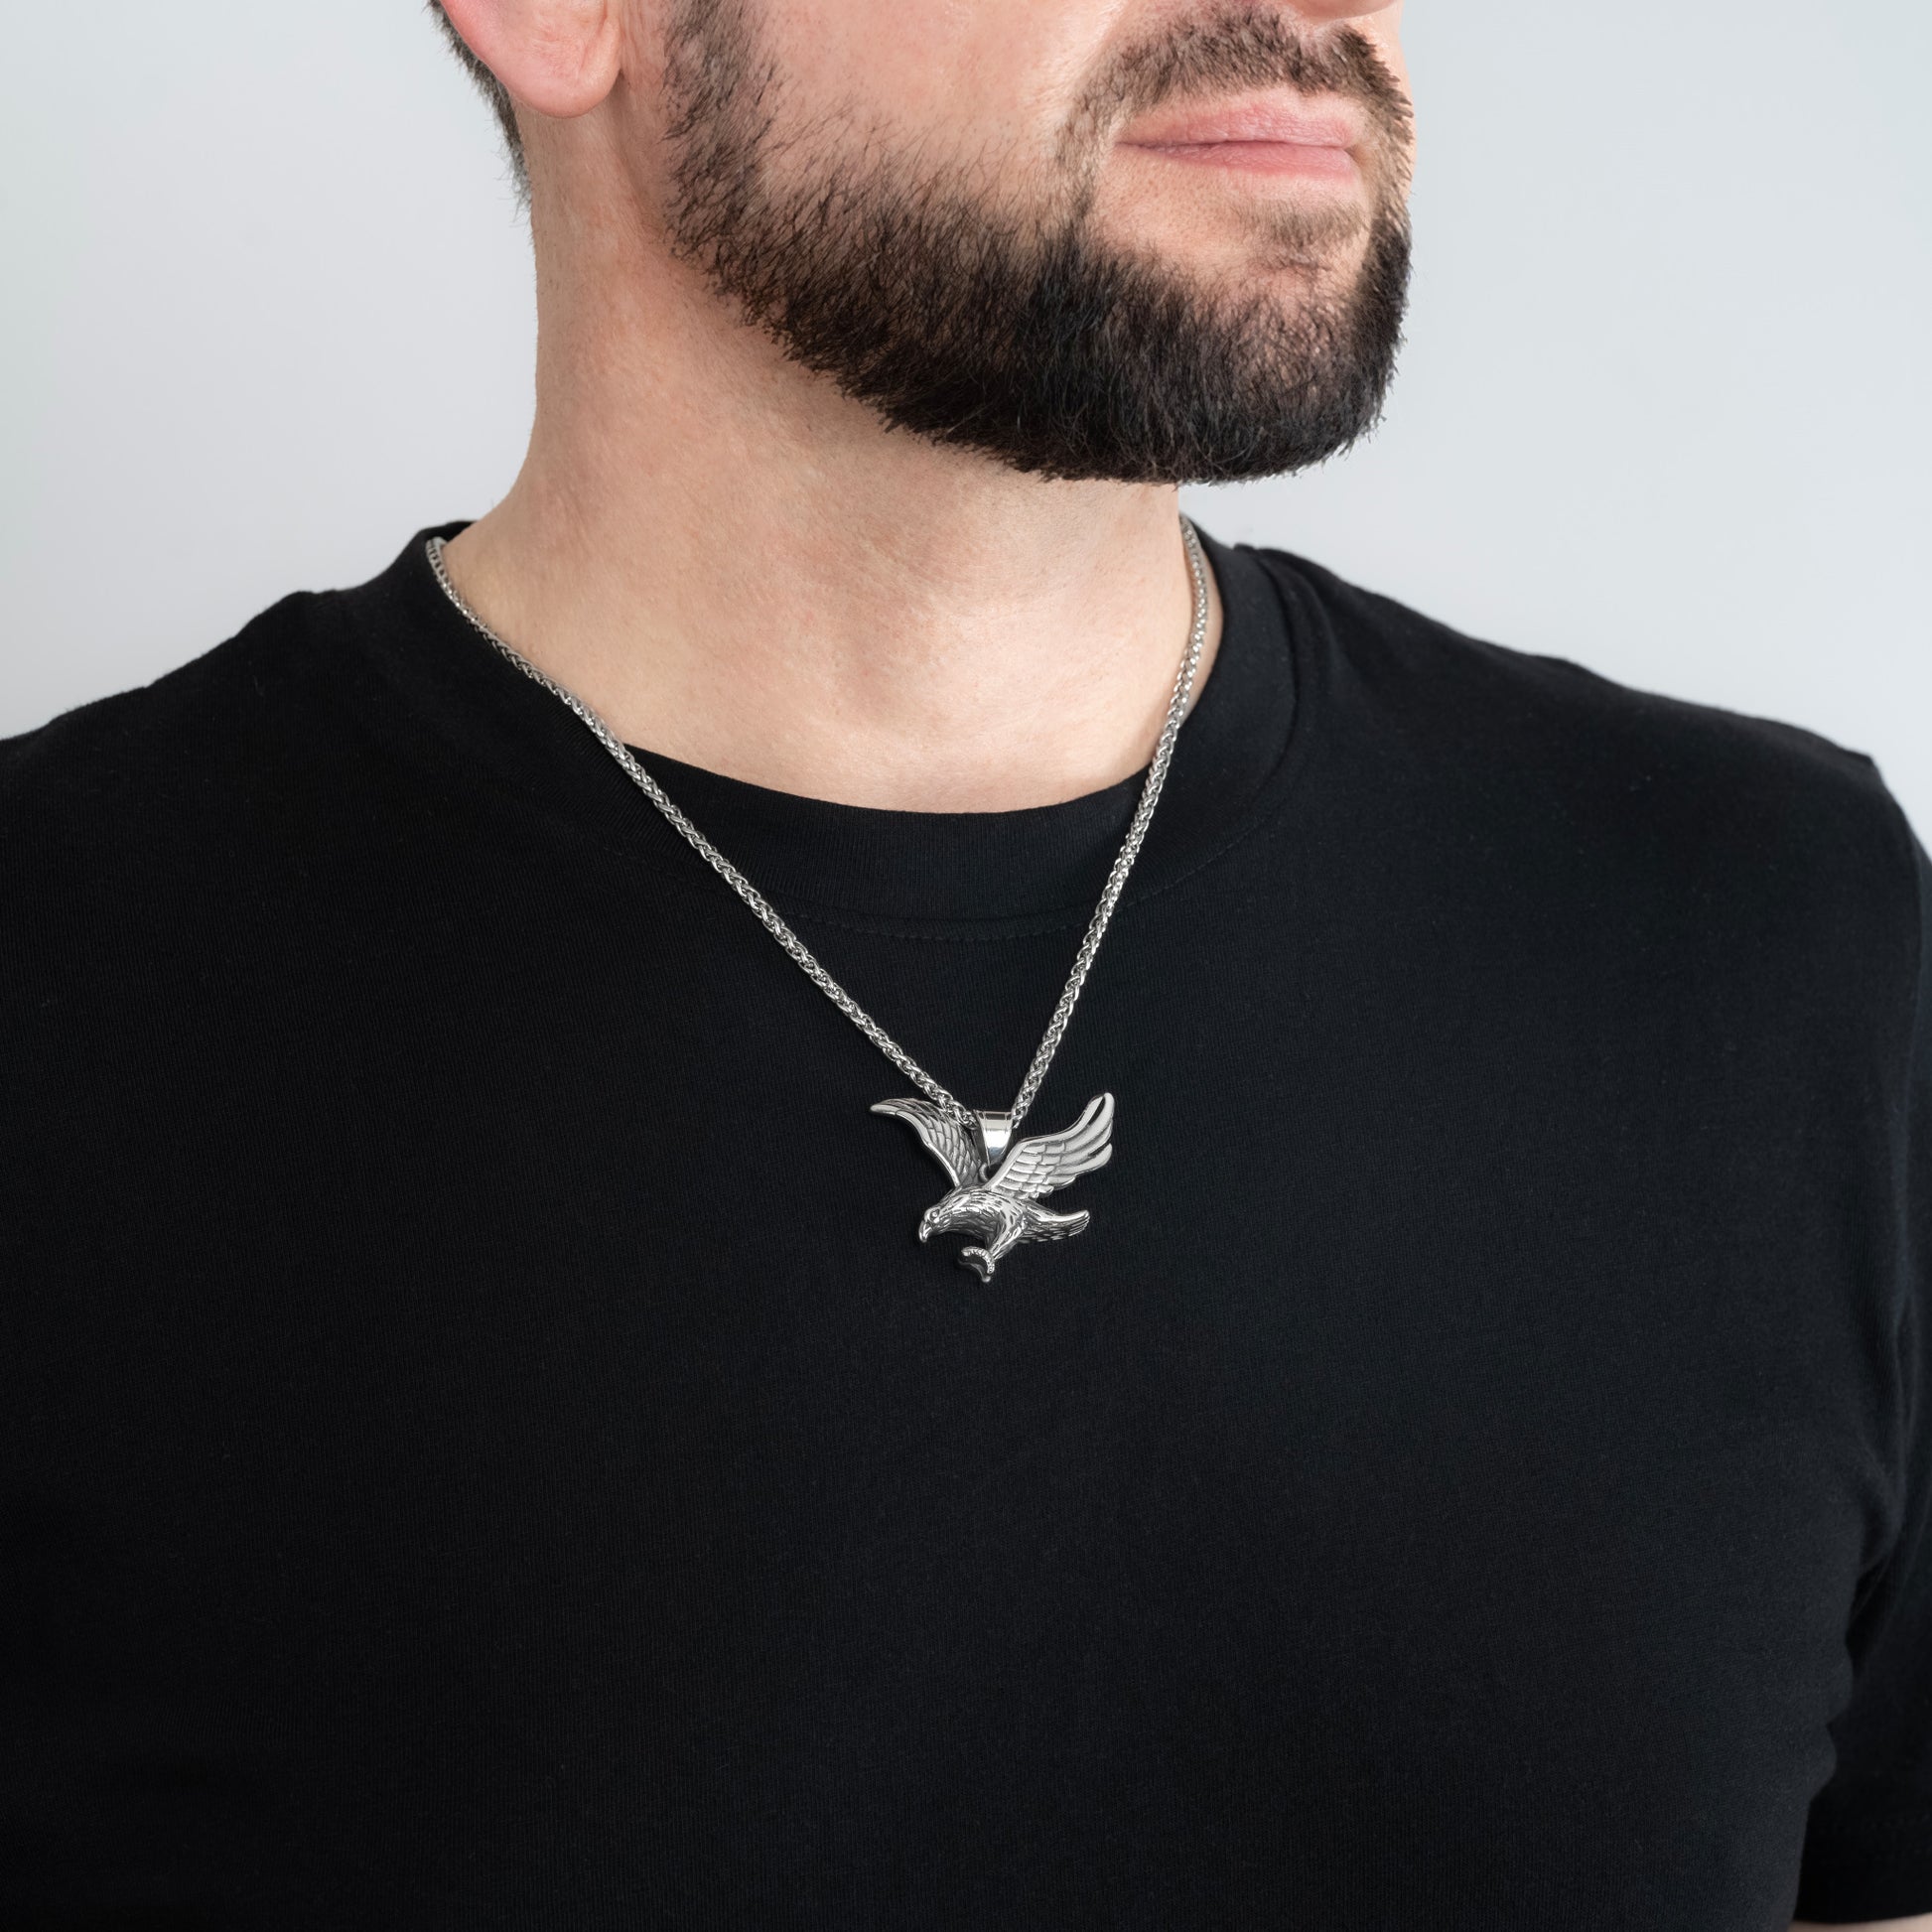 A male model in a black t-shirt wearing a Eagle Silver Pendant with a 3mm Spiga (Wheat) Silver chain 22 inches